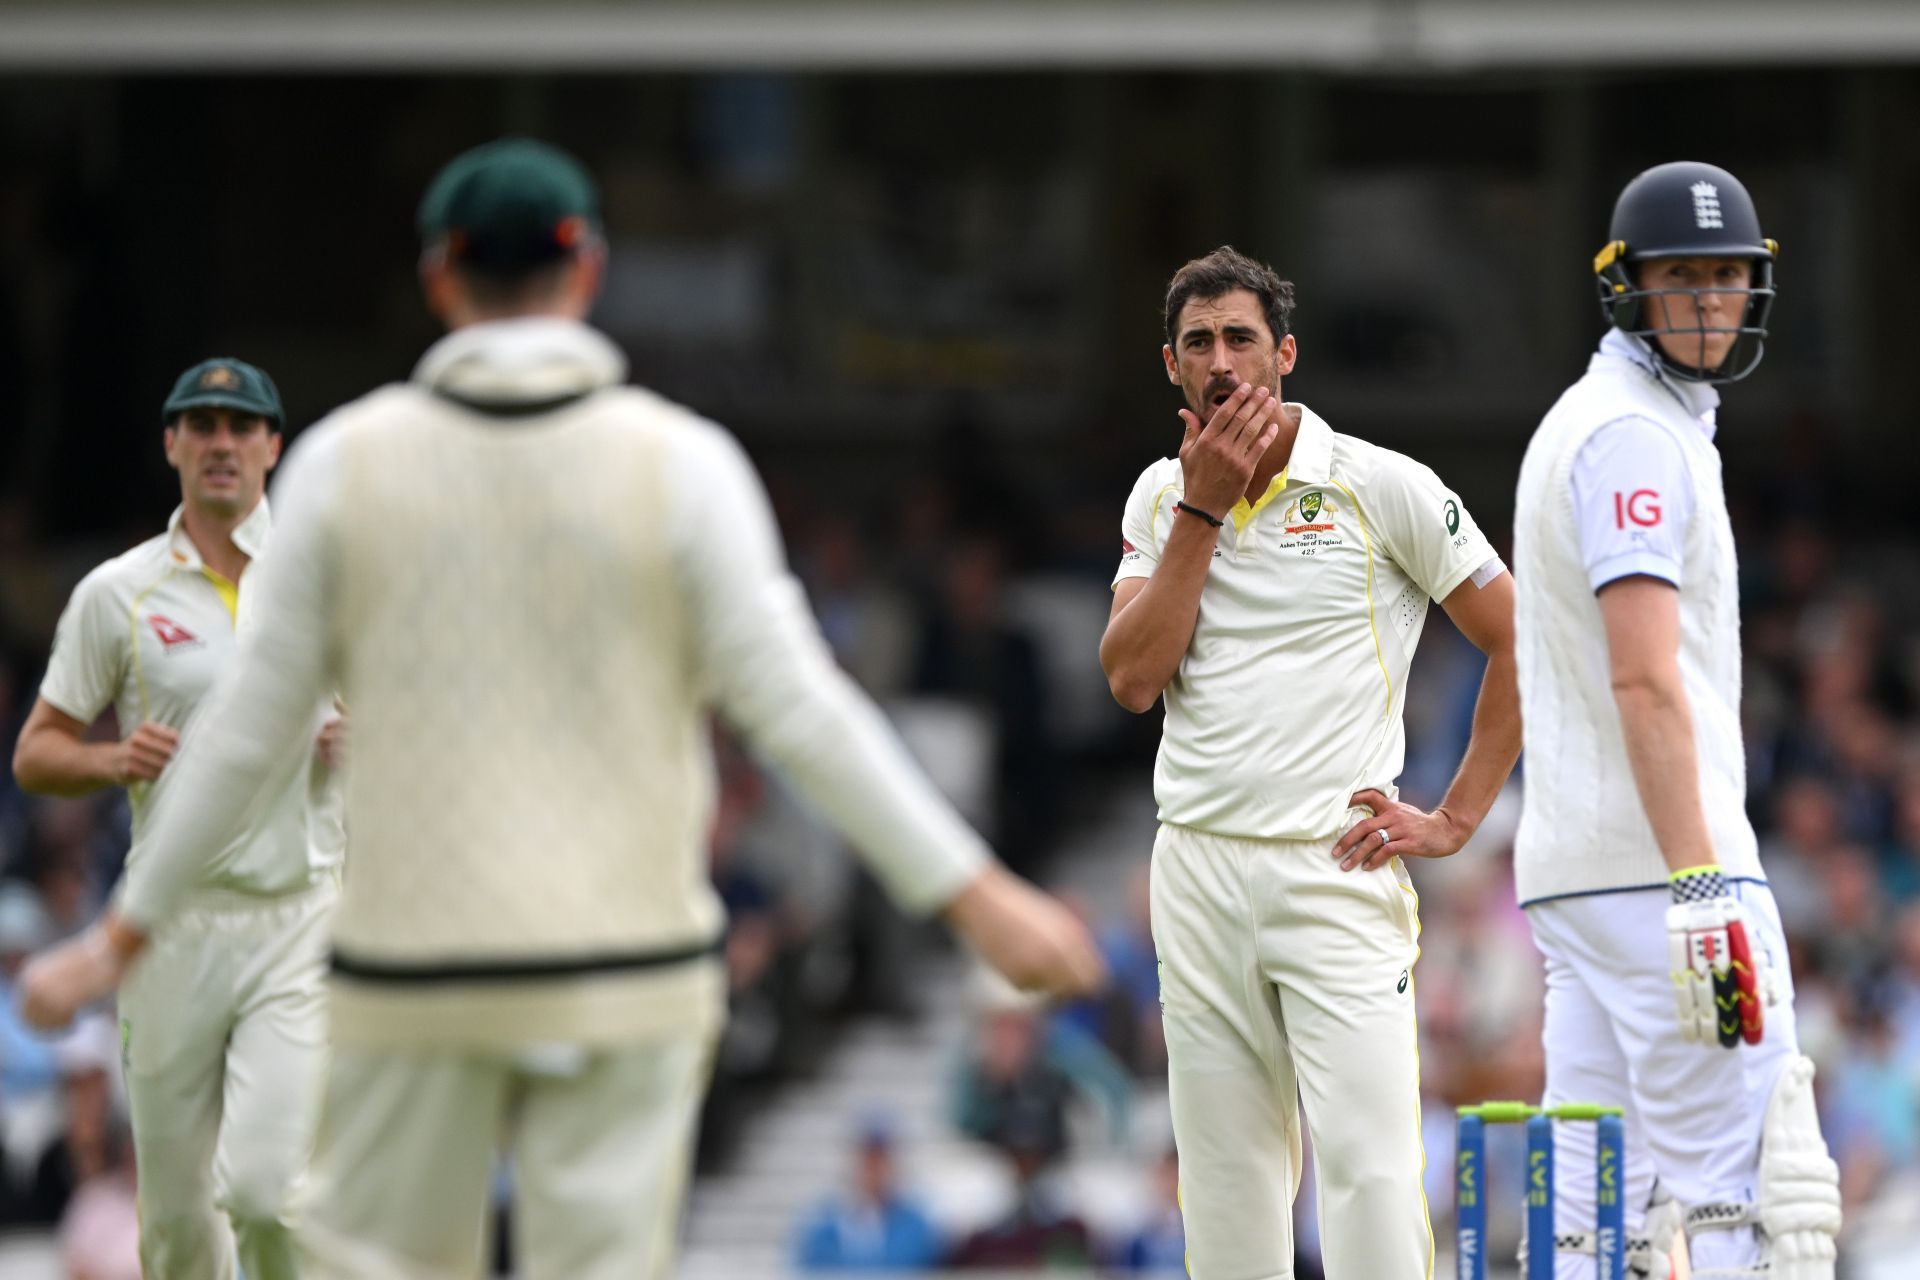 Australia was sloppy on Day 1 of the 5th Ashes Test